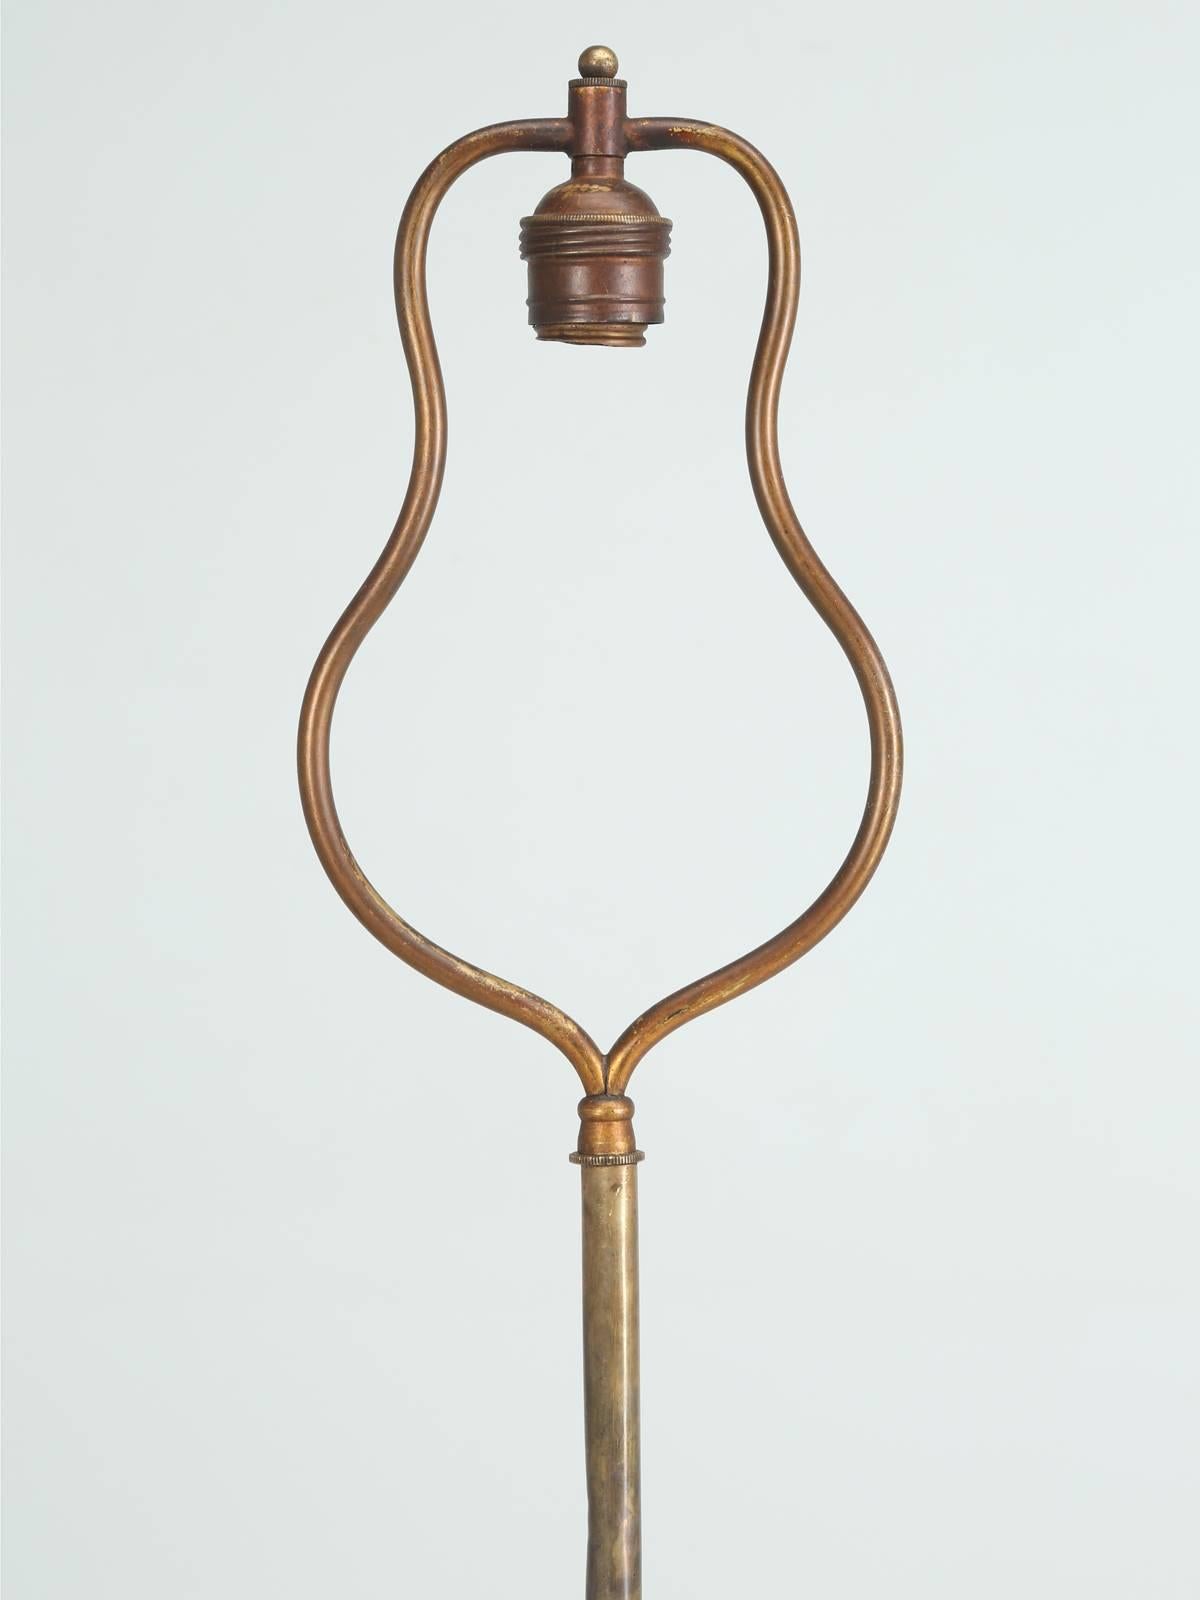 Interesting antique floor lamp, made from an English, circa 1918 Lee-Enfield Rifle, marked SMLE “Long Lees” configuration, or more commonly called a MKIII, built by BSA, who were the same folks who manufactured the famous BSA Motorcycle. We just